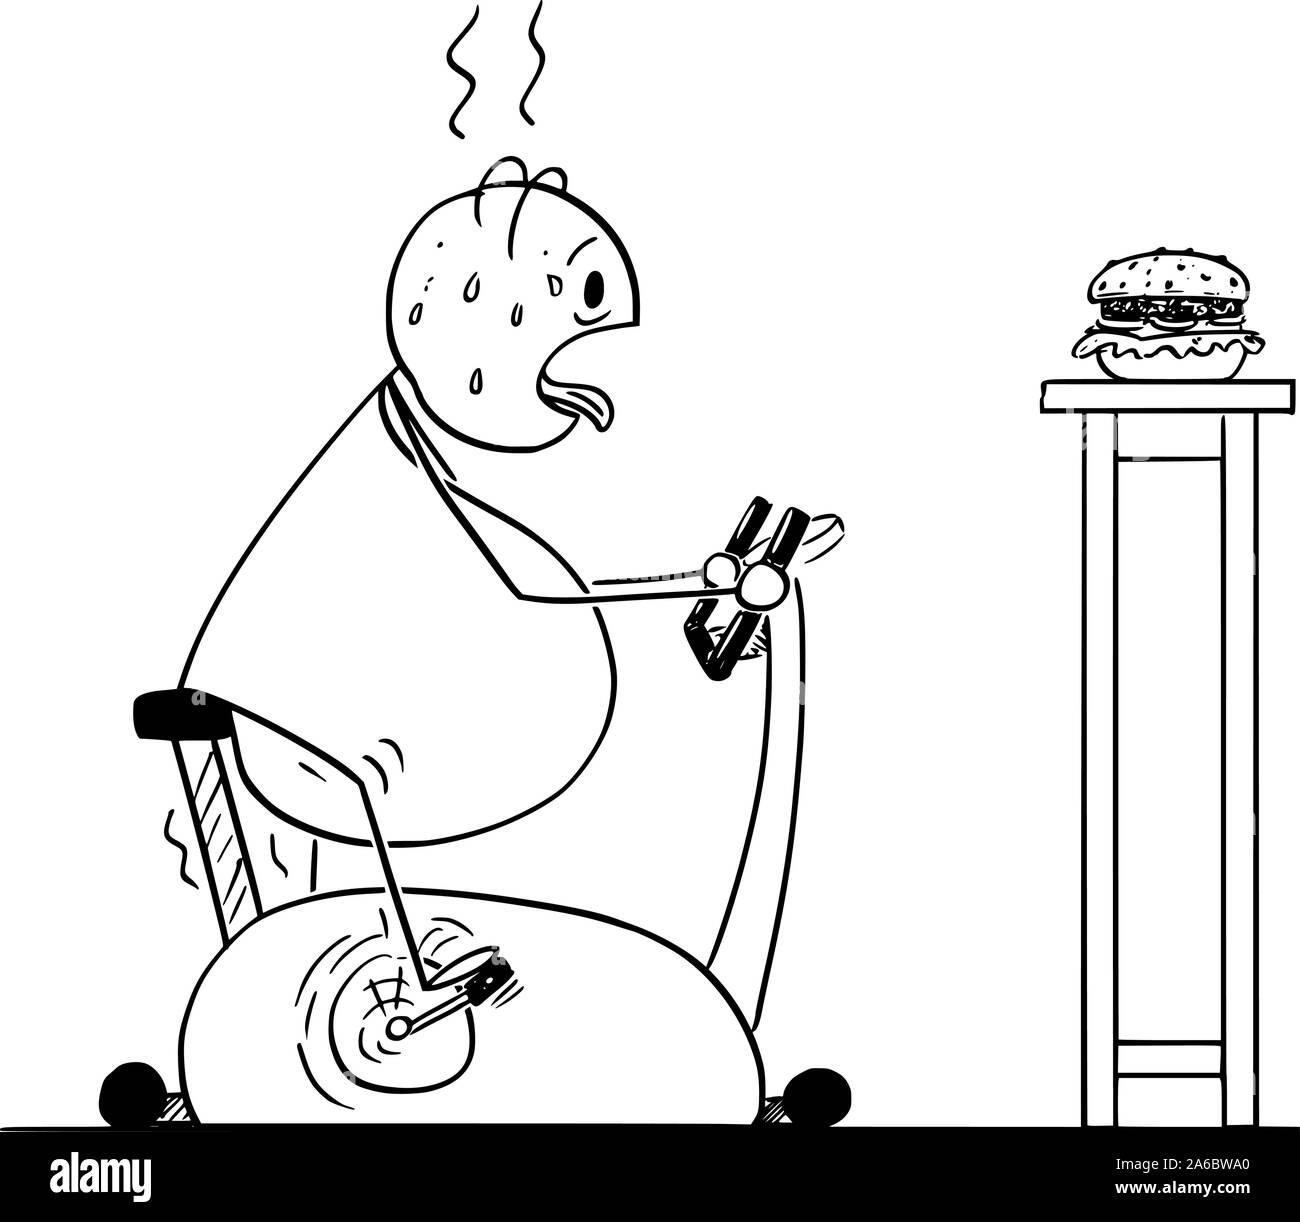 Vector cartoon stick figure drawing conceptual illustration of fat or overweight man riding exercise bike or stationary bicycle and looking at burger. Concept of healthy lifestyle. Stock Vector